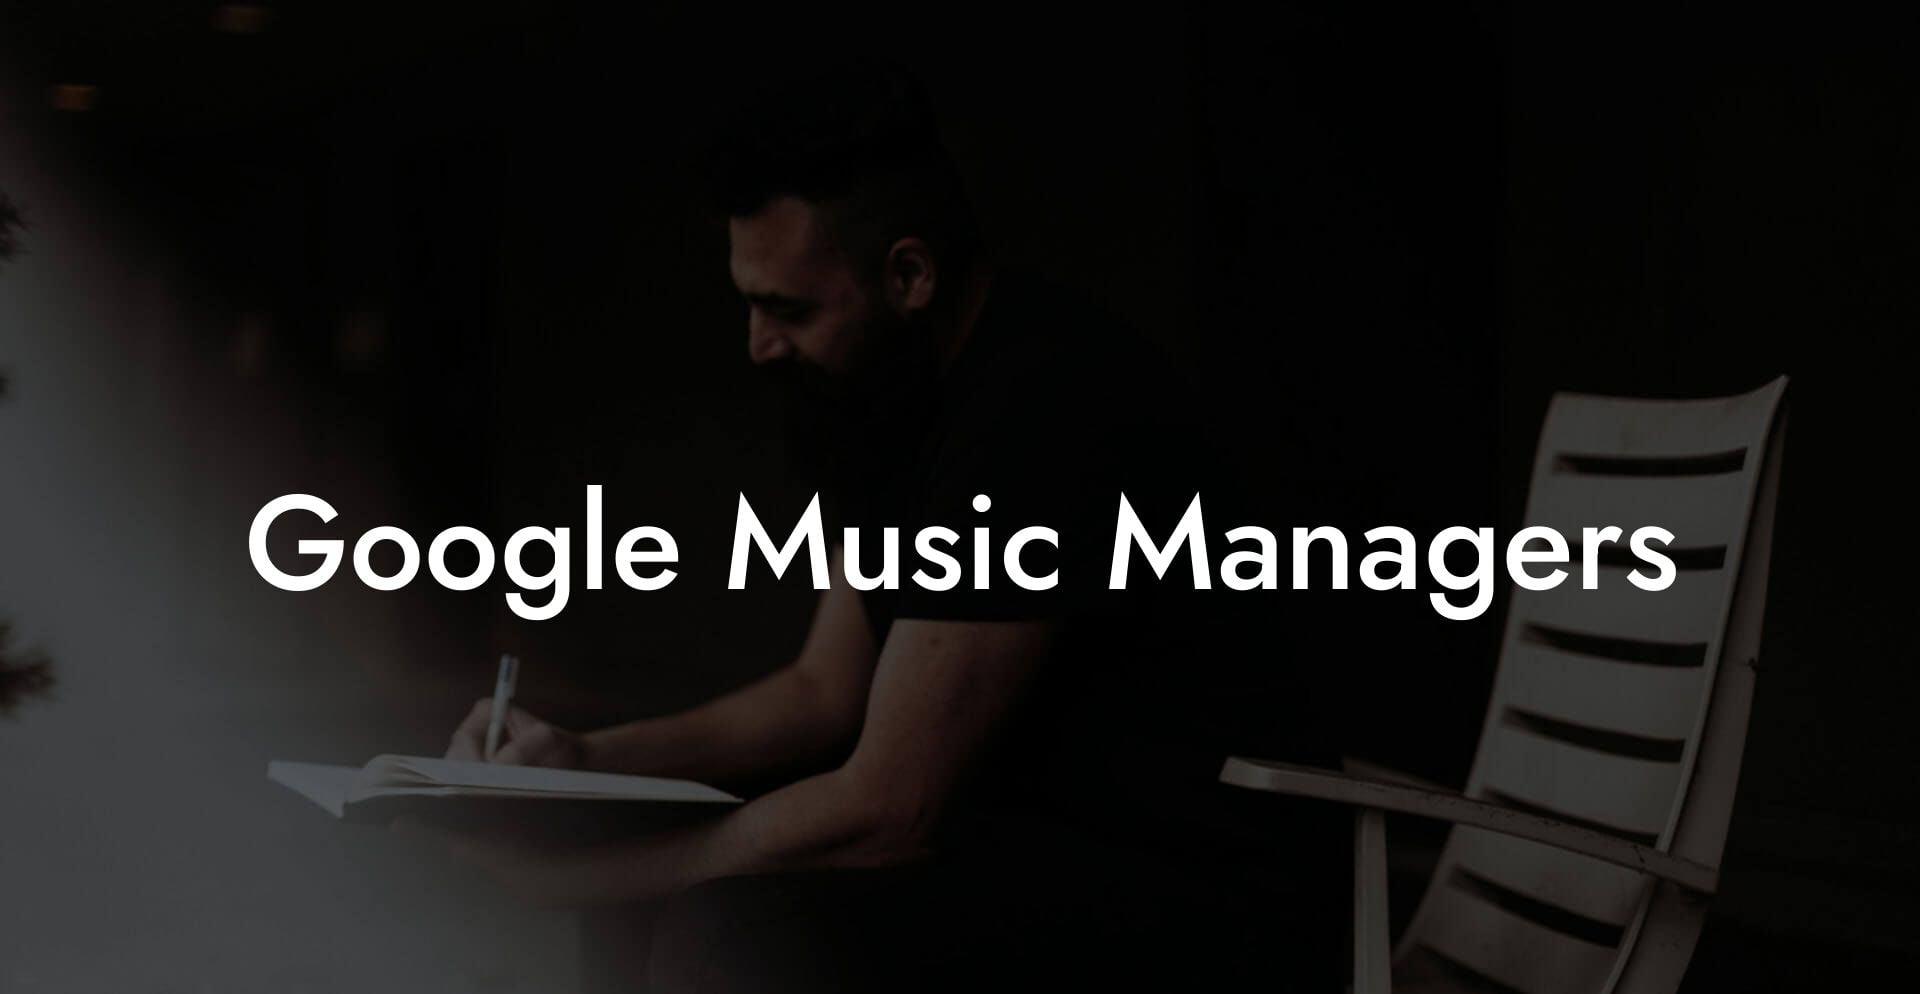 Google Music Managers